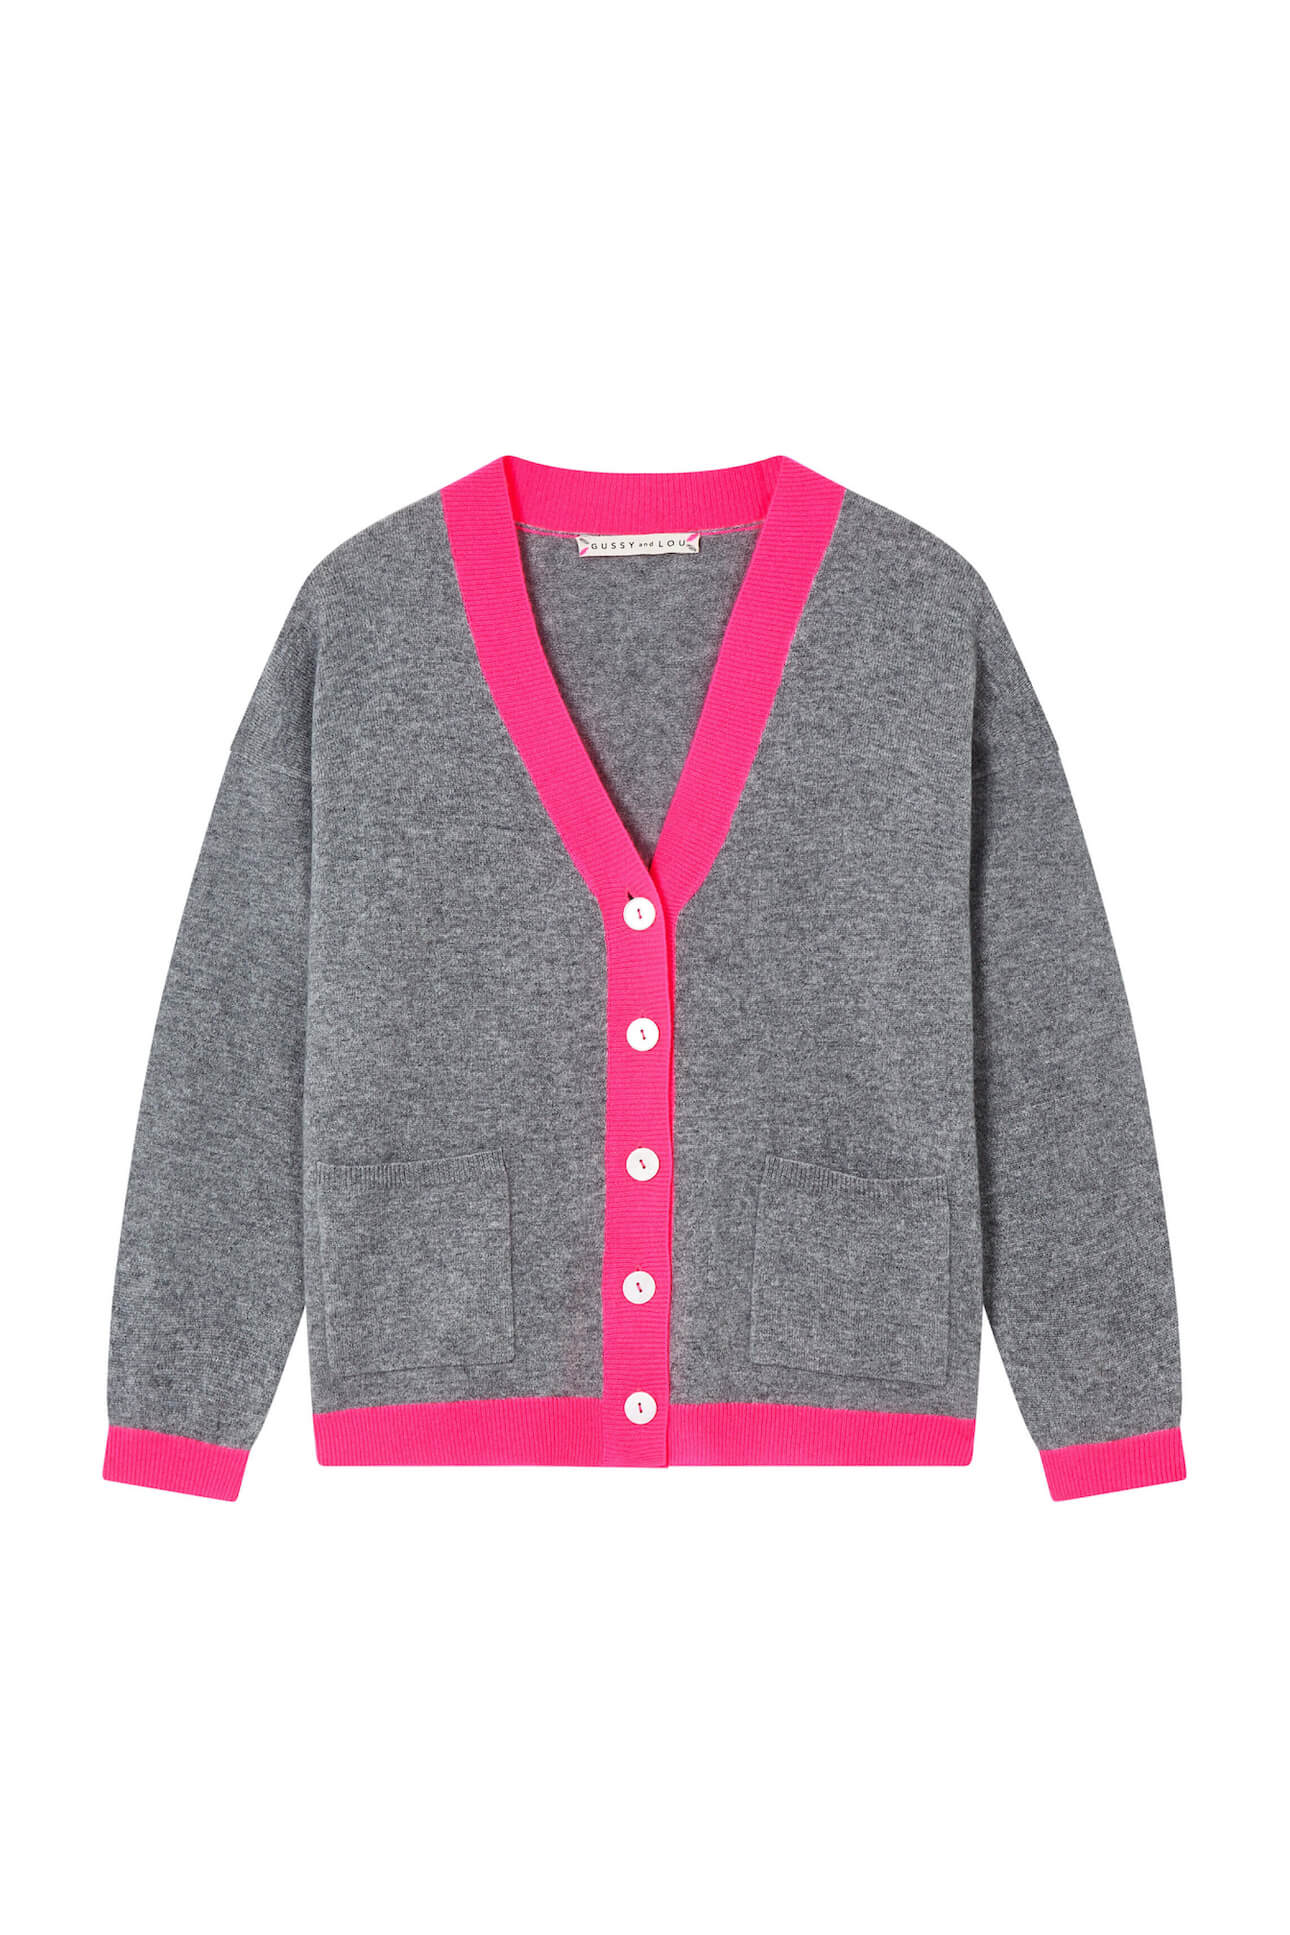 Grey with Neon Pink Cashmere Cardigan | Gussy and Lou